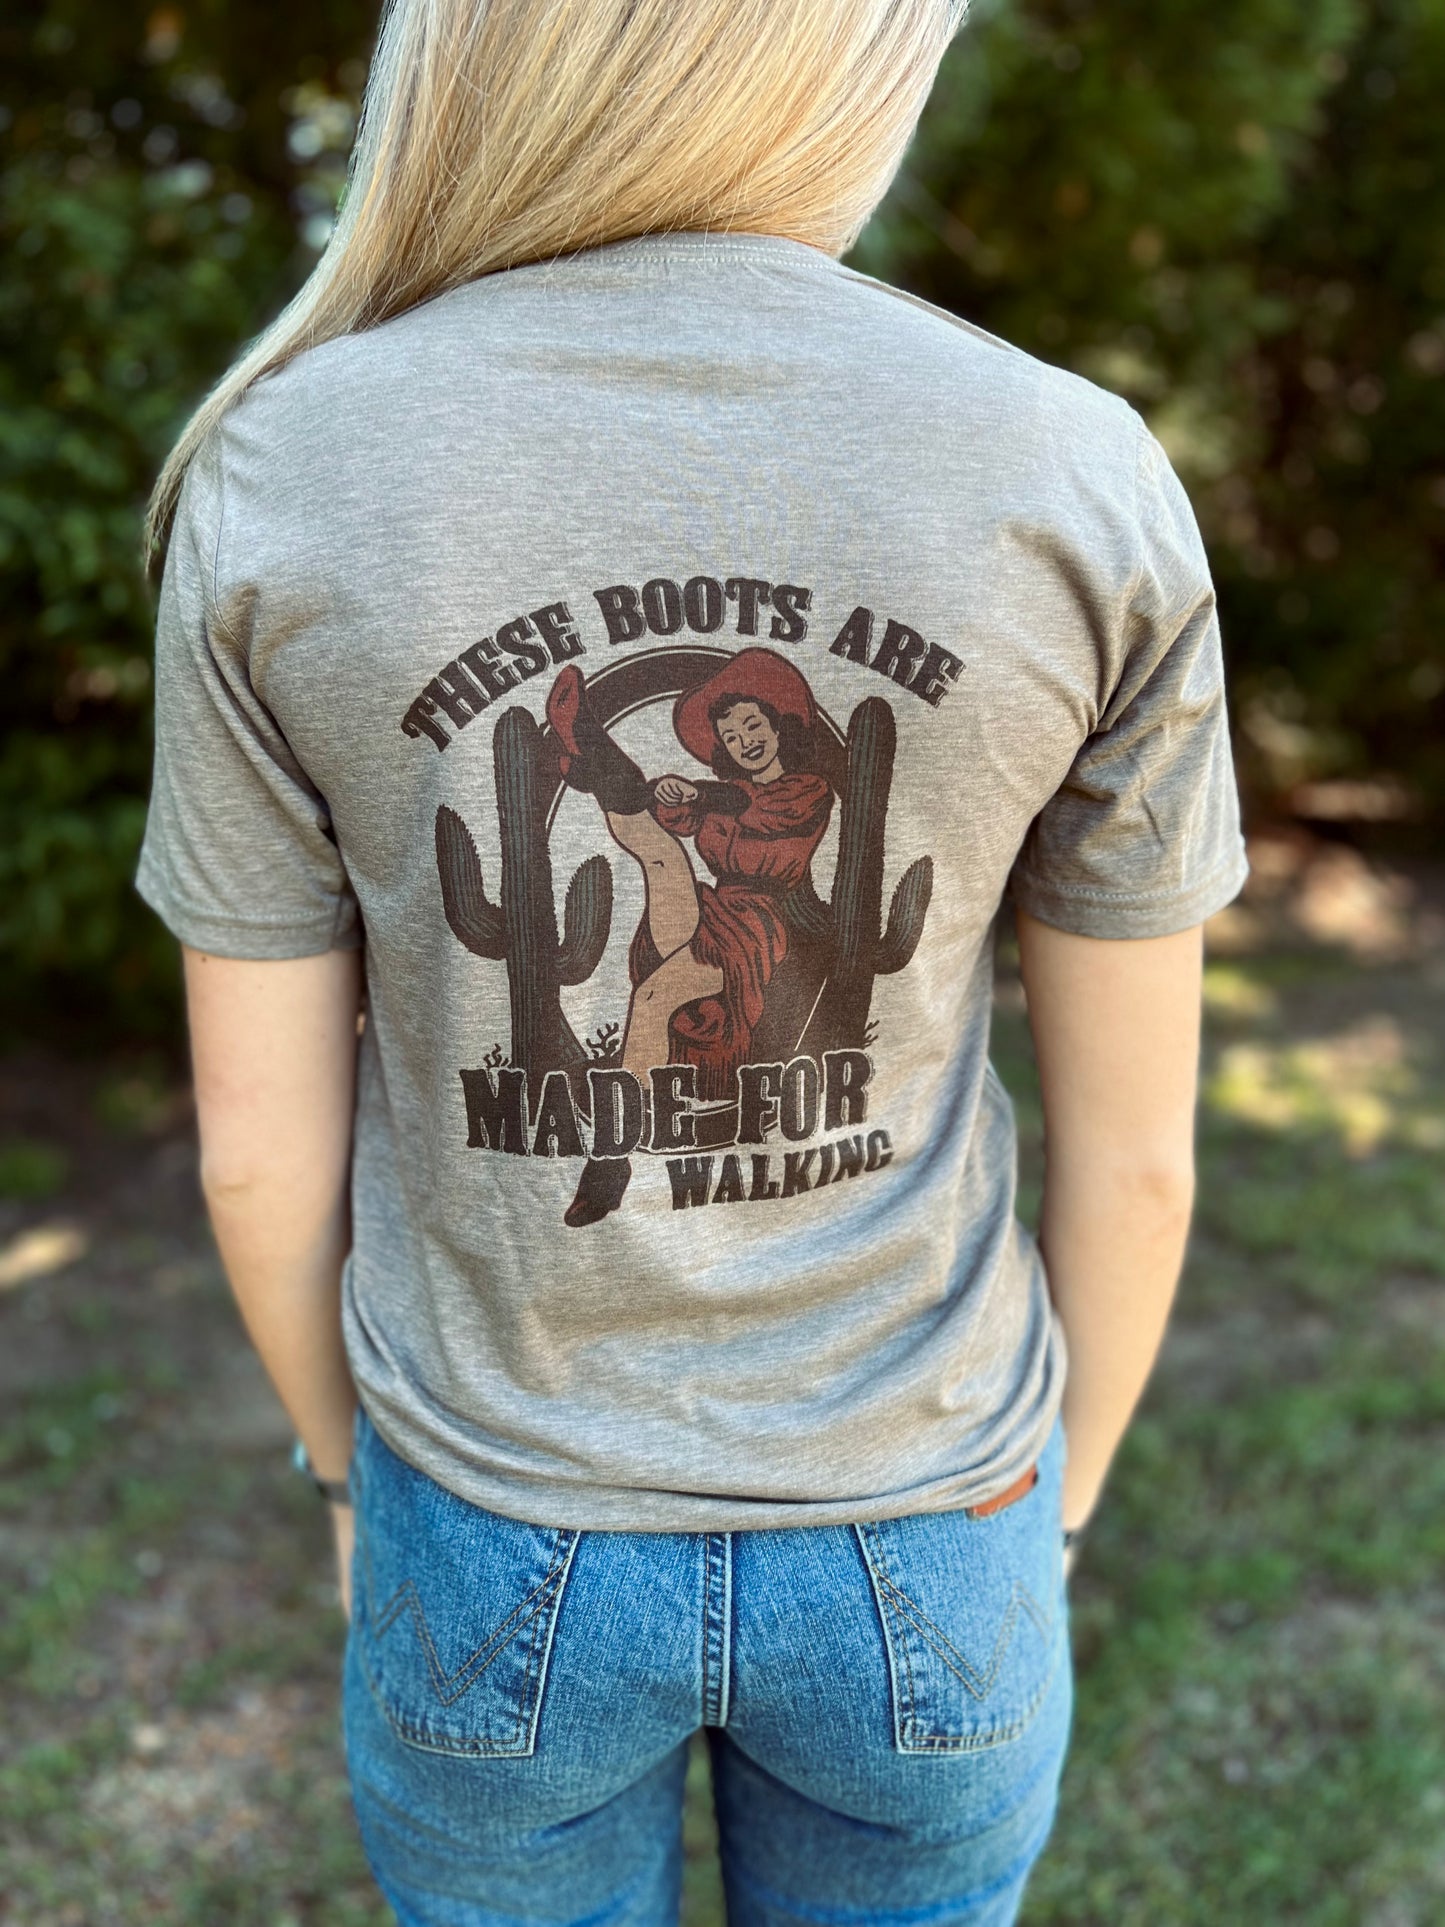 These Boots Are Made For Walking T-shirt